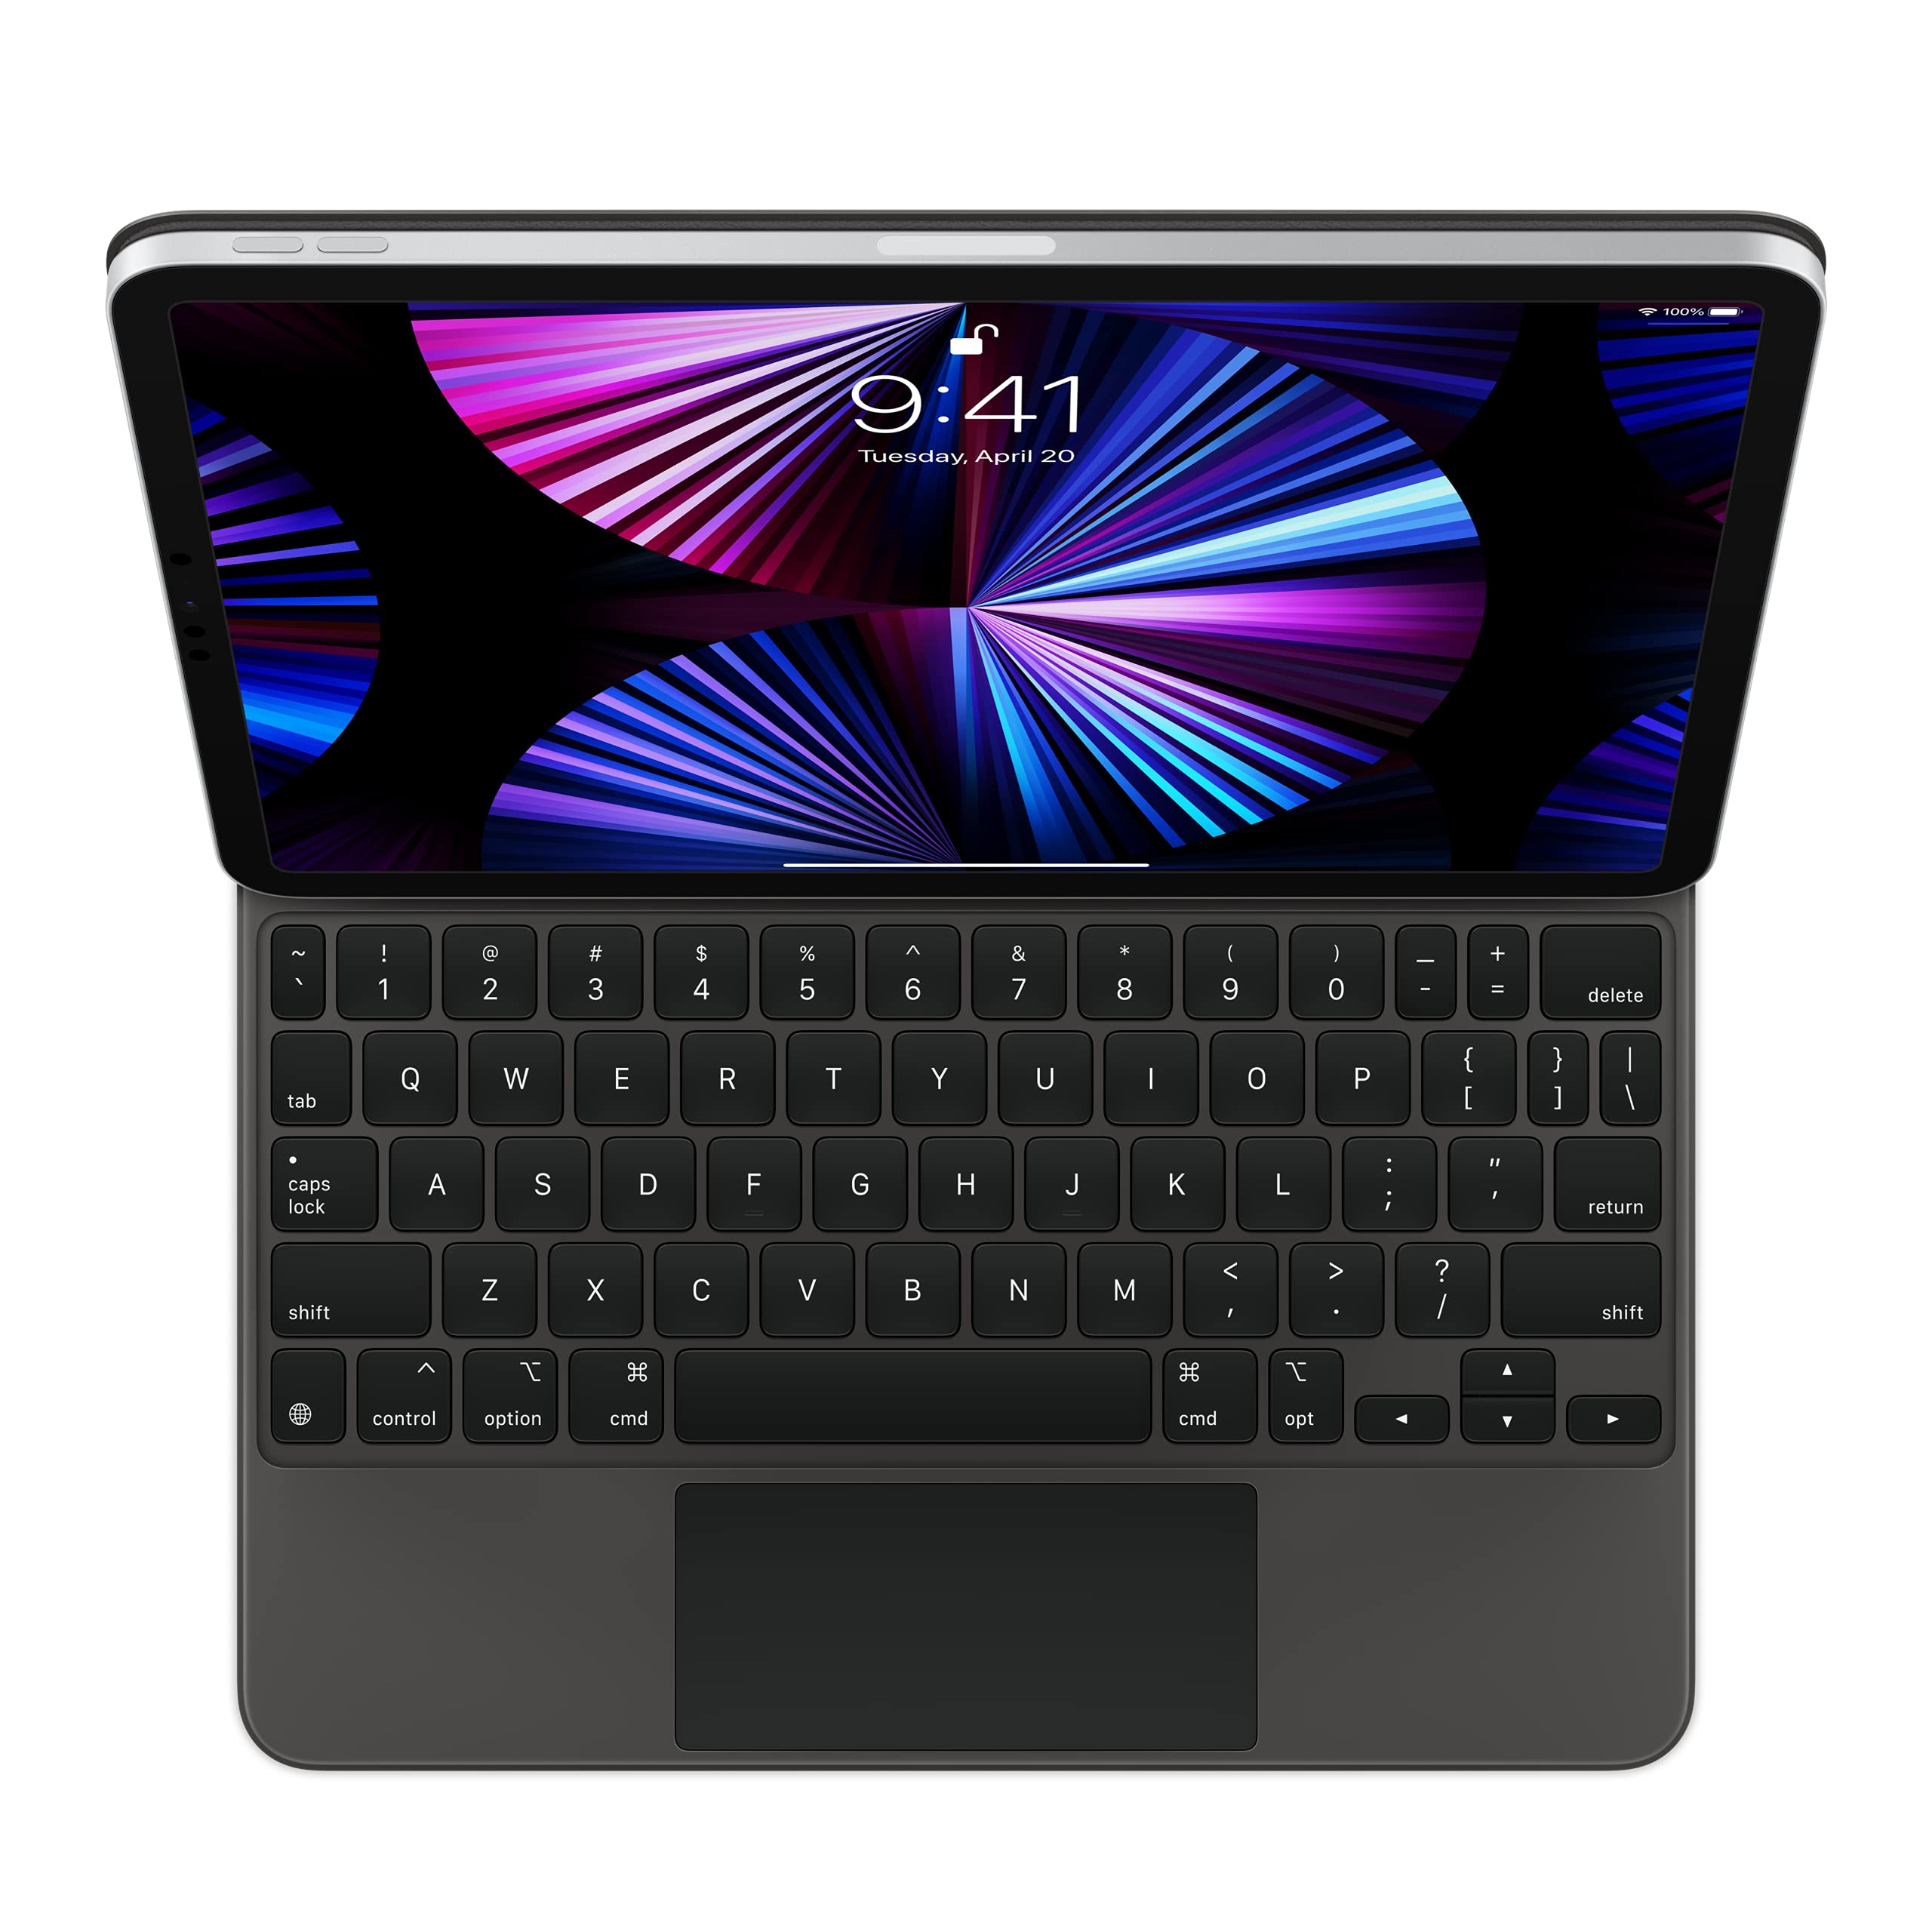 Apple Magic Keyboard: iPad Keyboard case for iPad Pro 11-inch (1st, 2nd, 3rd, 4th Generation) and iPad Air (4th, 5th Generation), Great Typing Experience, Built-in trackp - $250